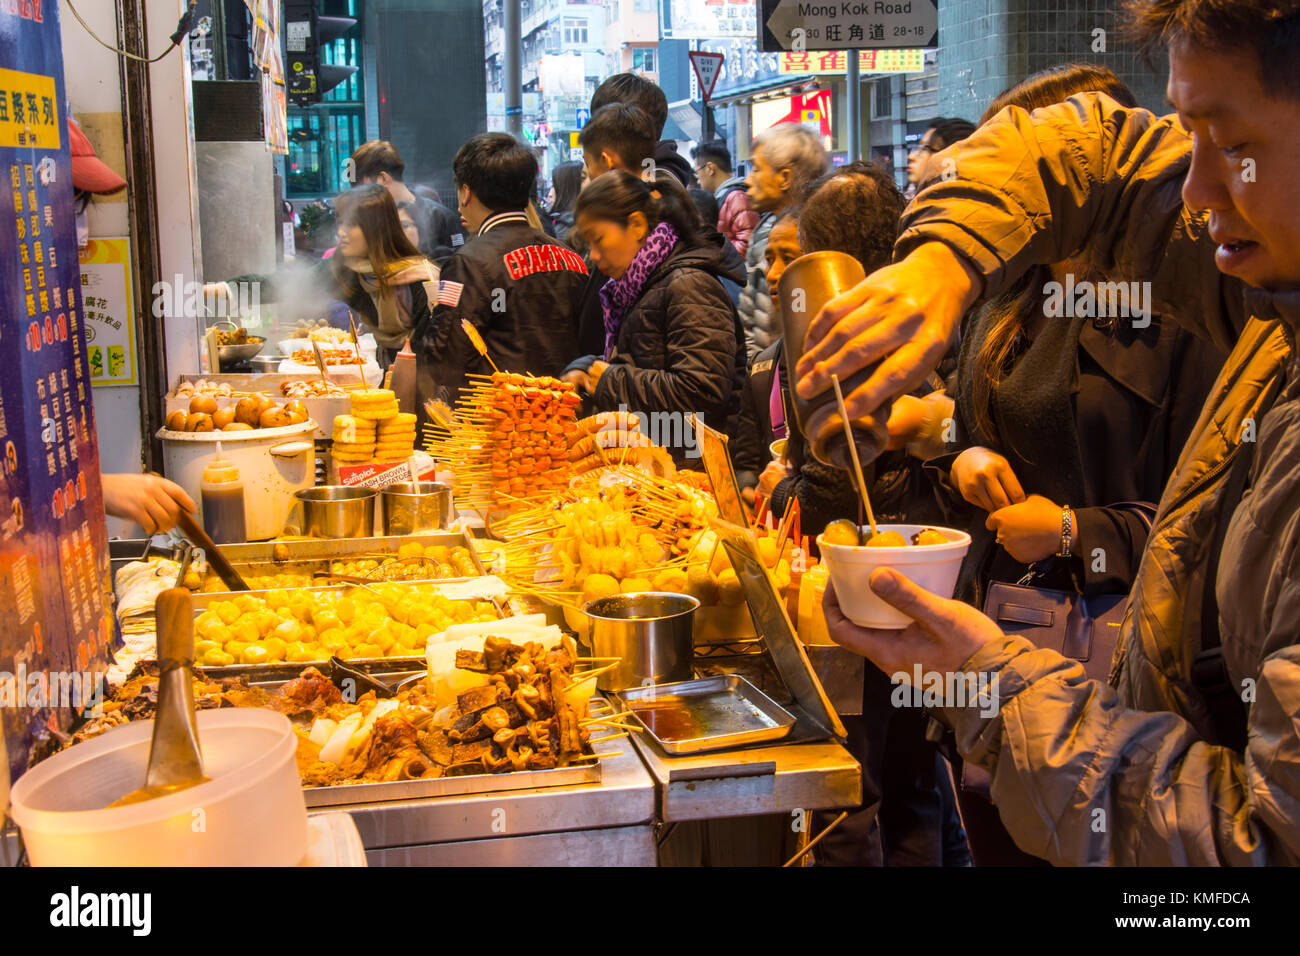 People buying food on the street in Hong Kong Stock Photo